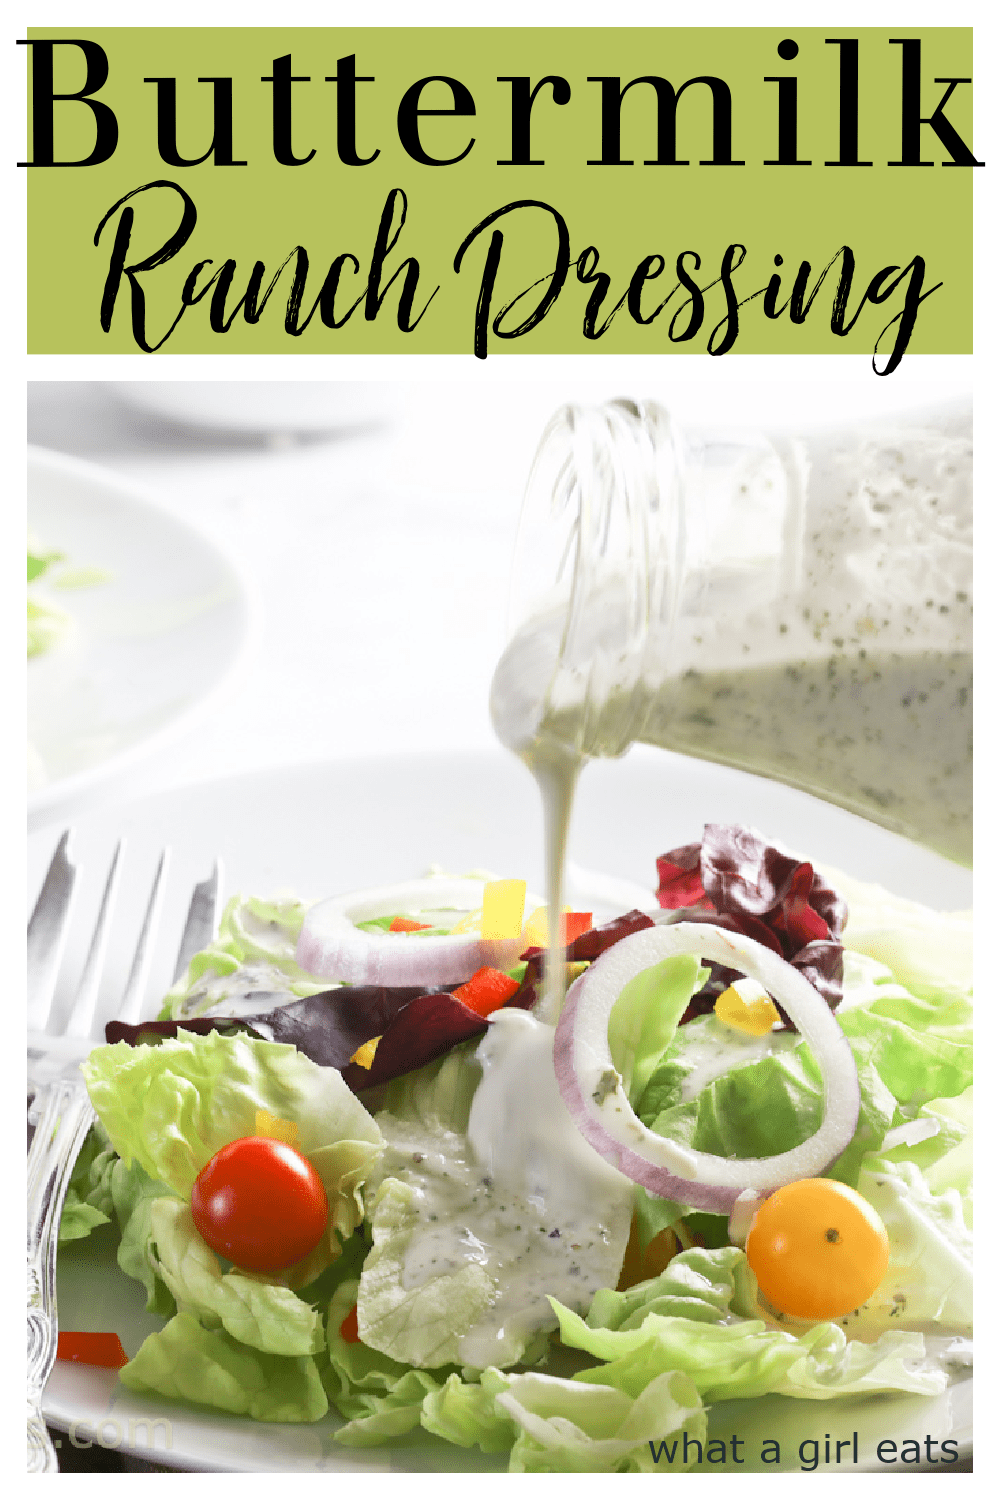 Rich, tangy, creamy and herby, buttermilk ranch dressing has been a salad staple for over 40 years. Delicious on a salad or as a veggie dip,